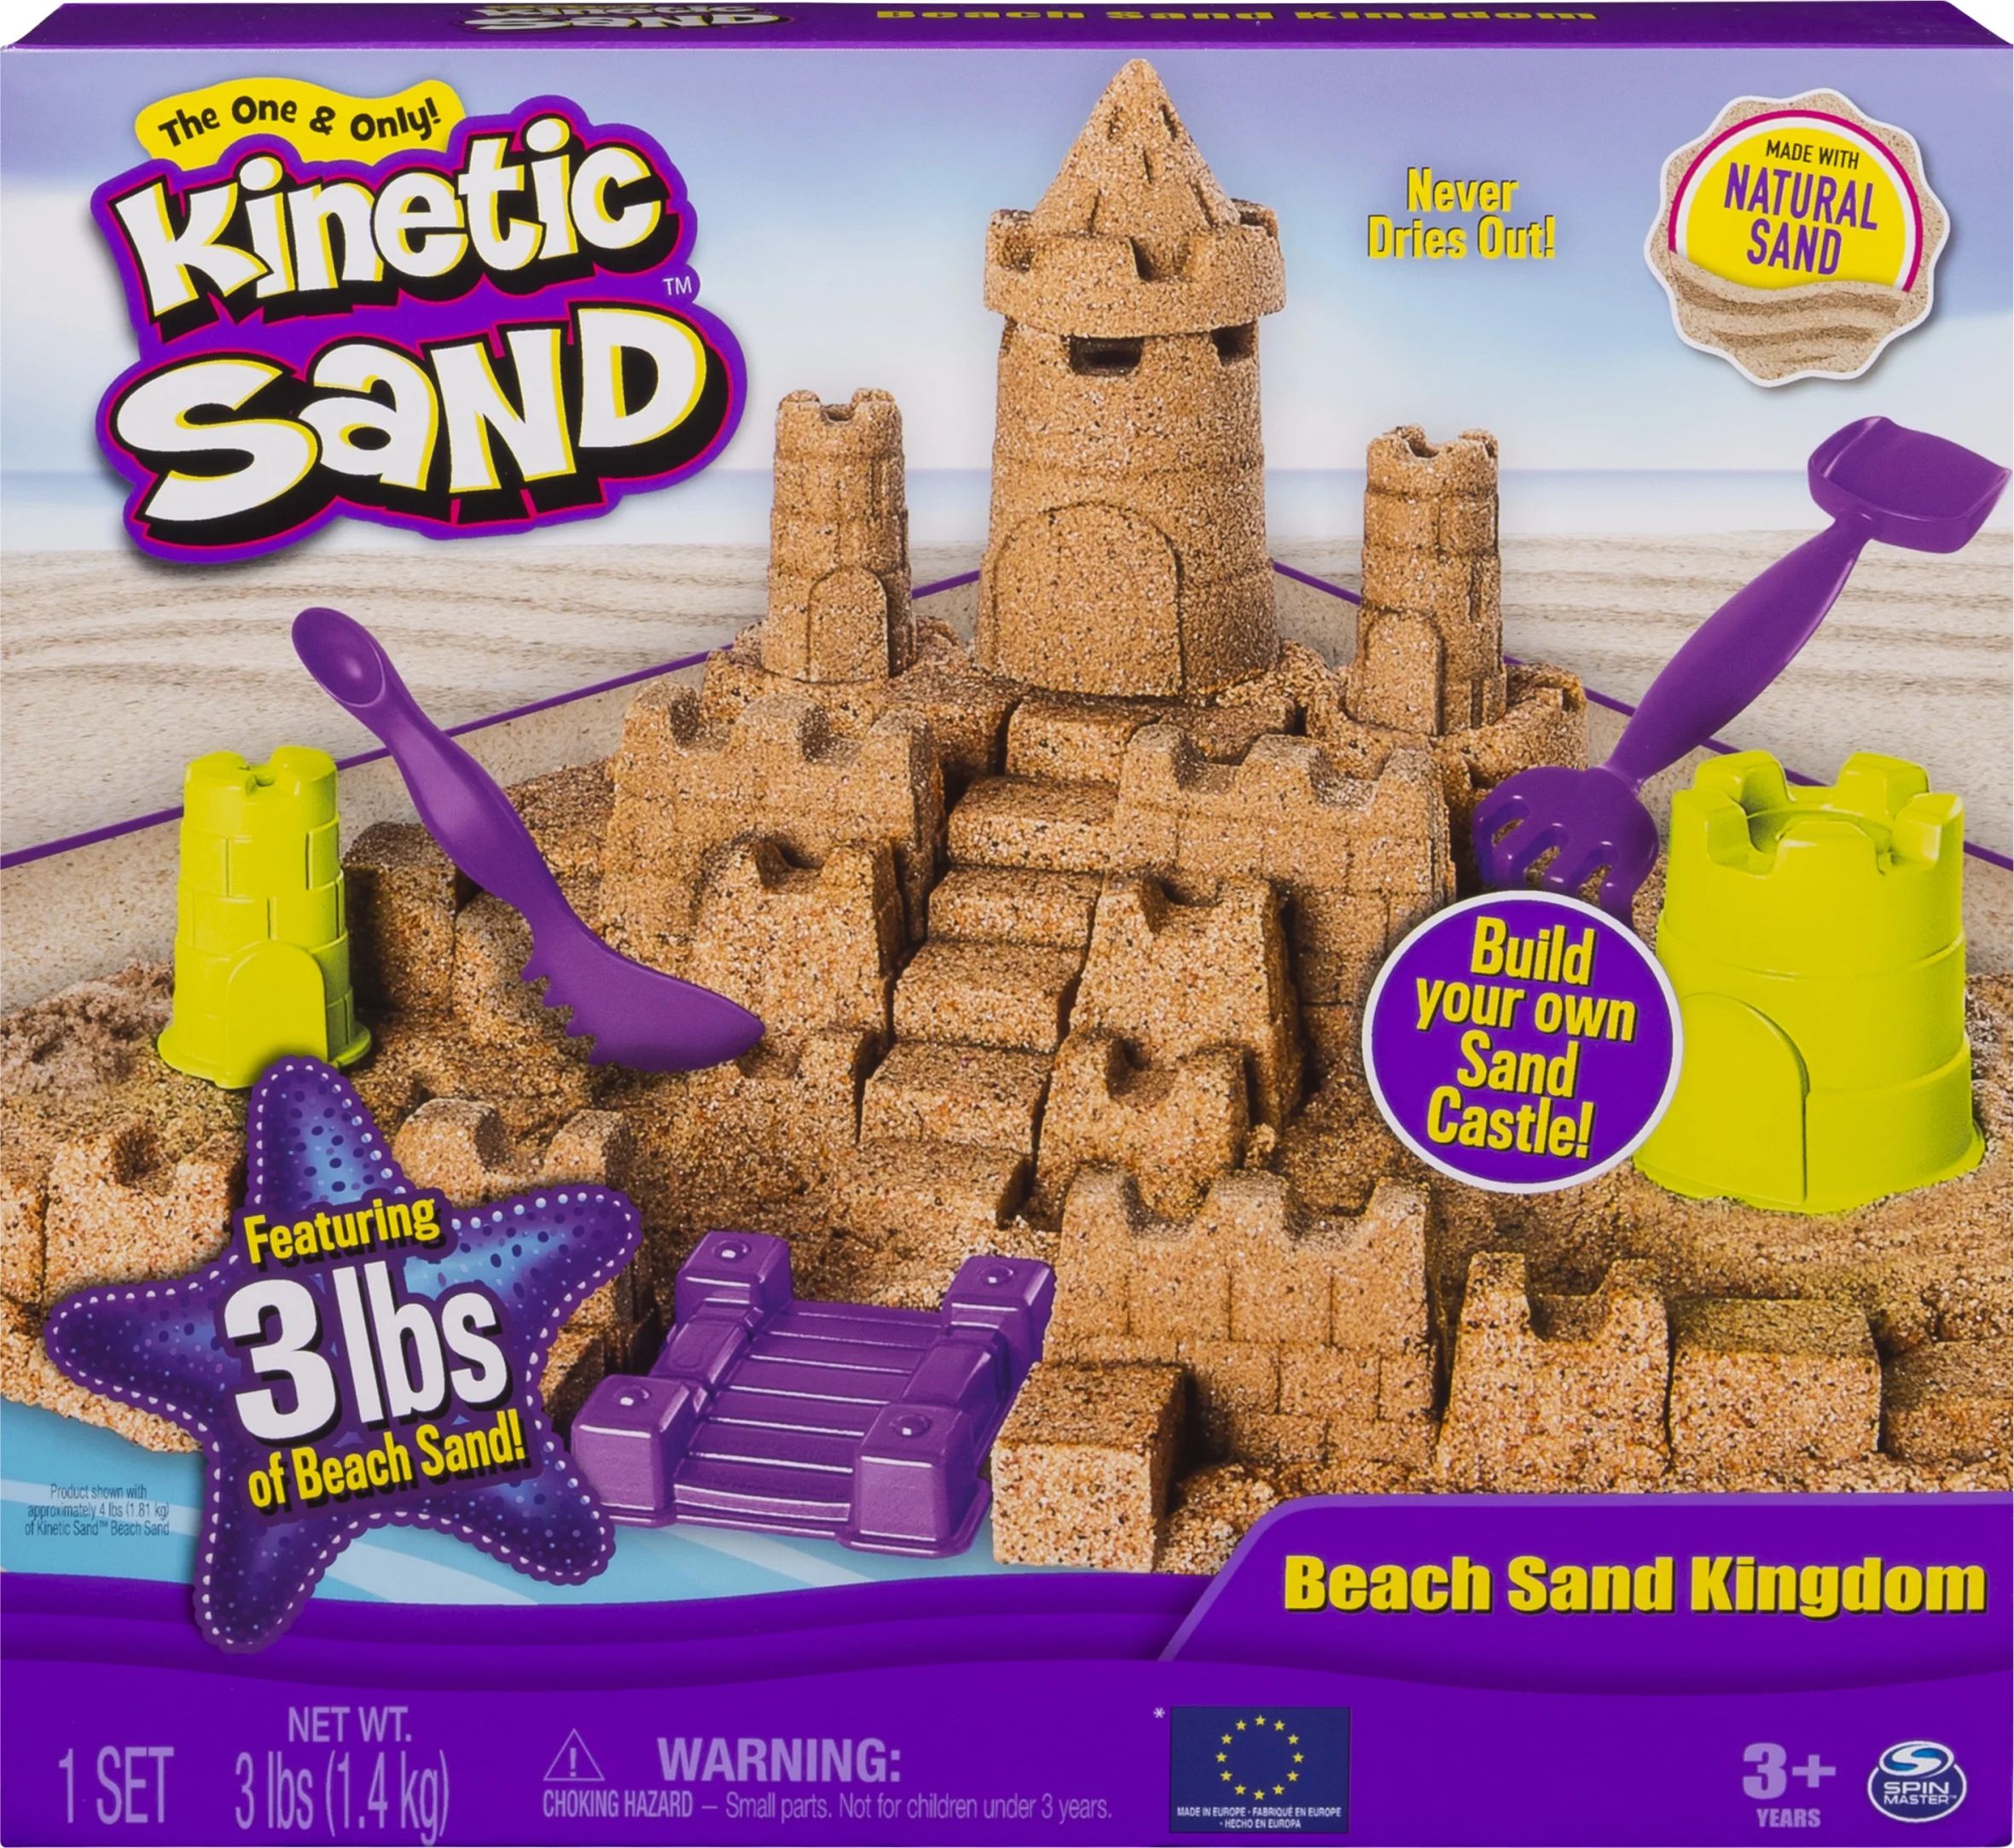 Kinetic Sand Beach Sand Kingdom Playset with 3lbs of Beach Sand, includes Molds and Tools, Play S... | Walmart (US)